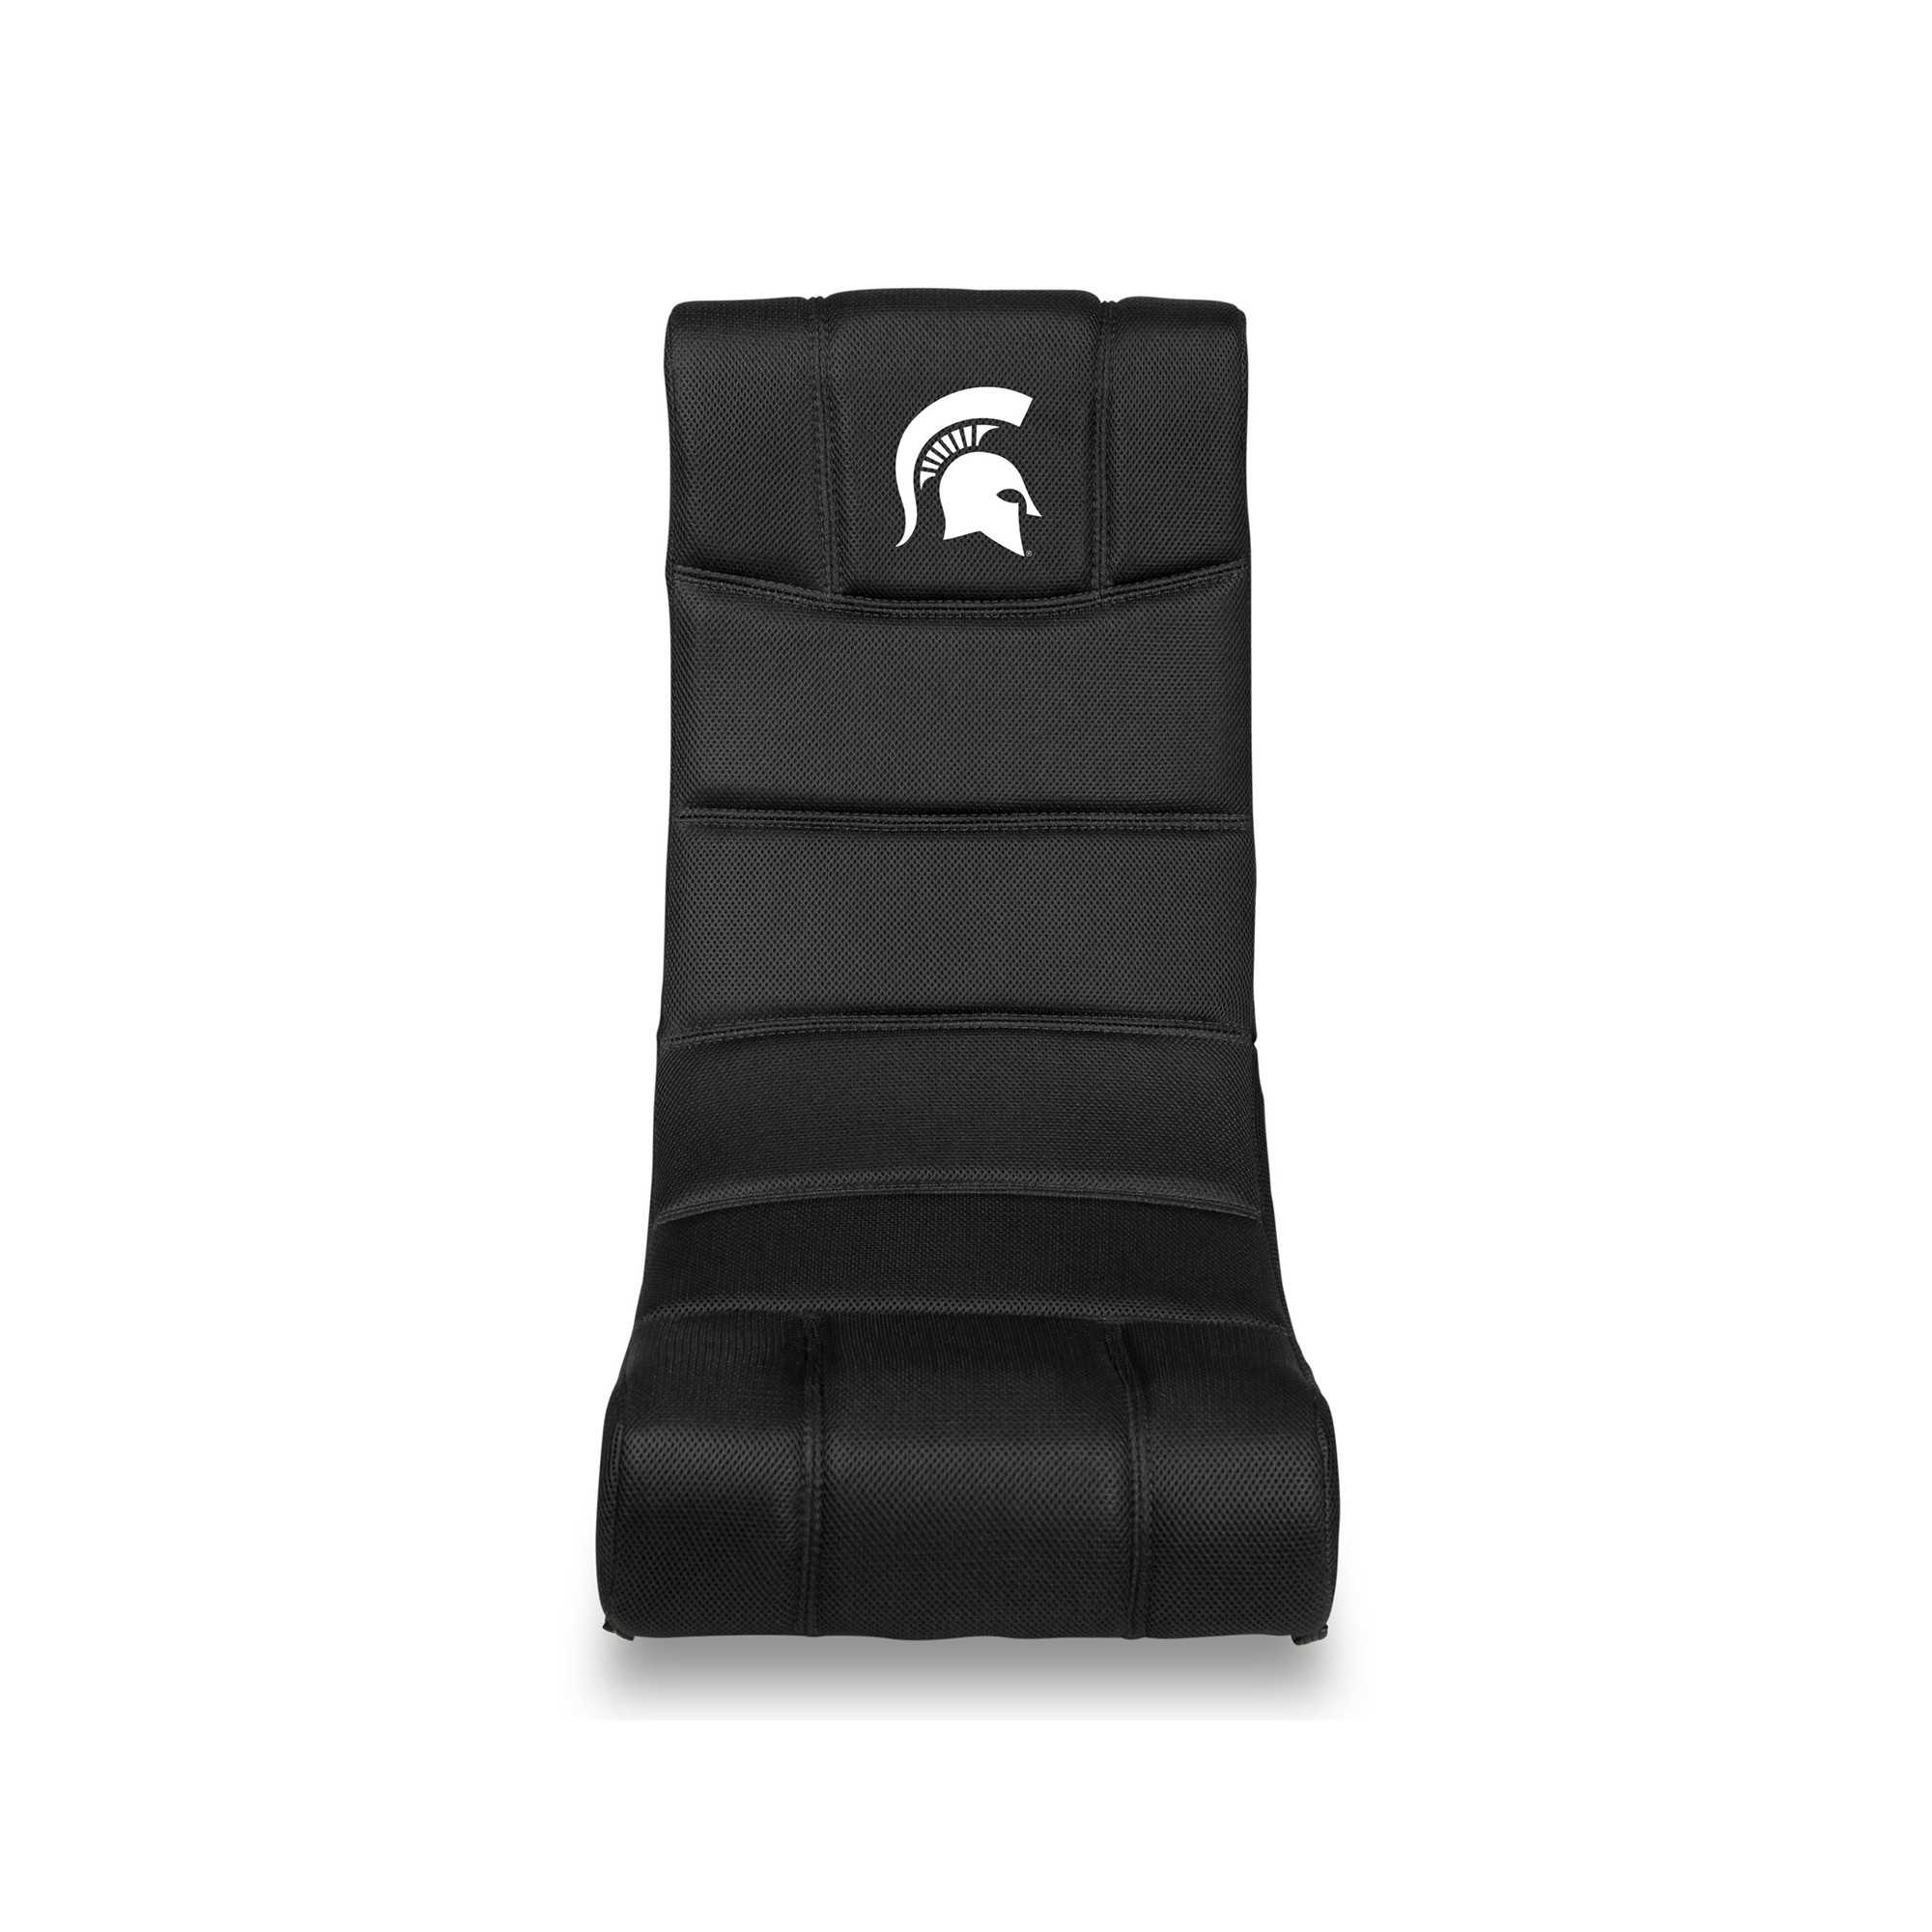 Michigan State Video Chair With Blue Tooth